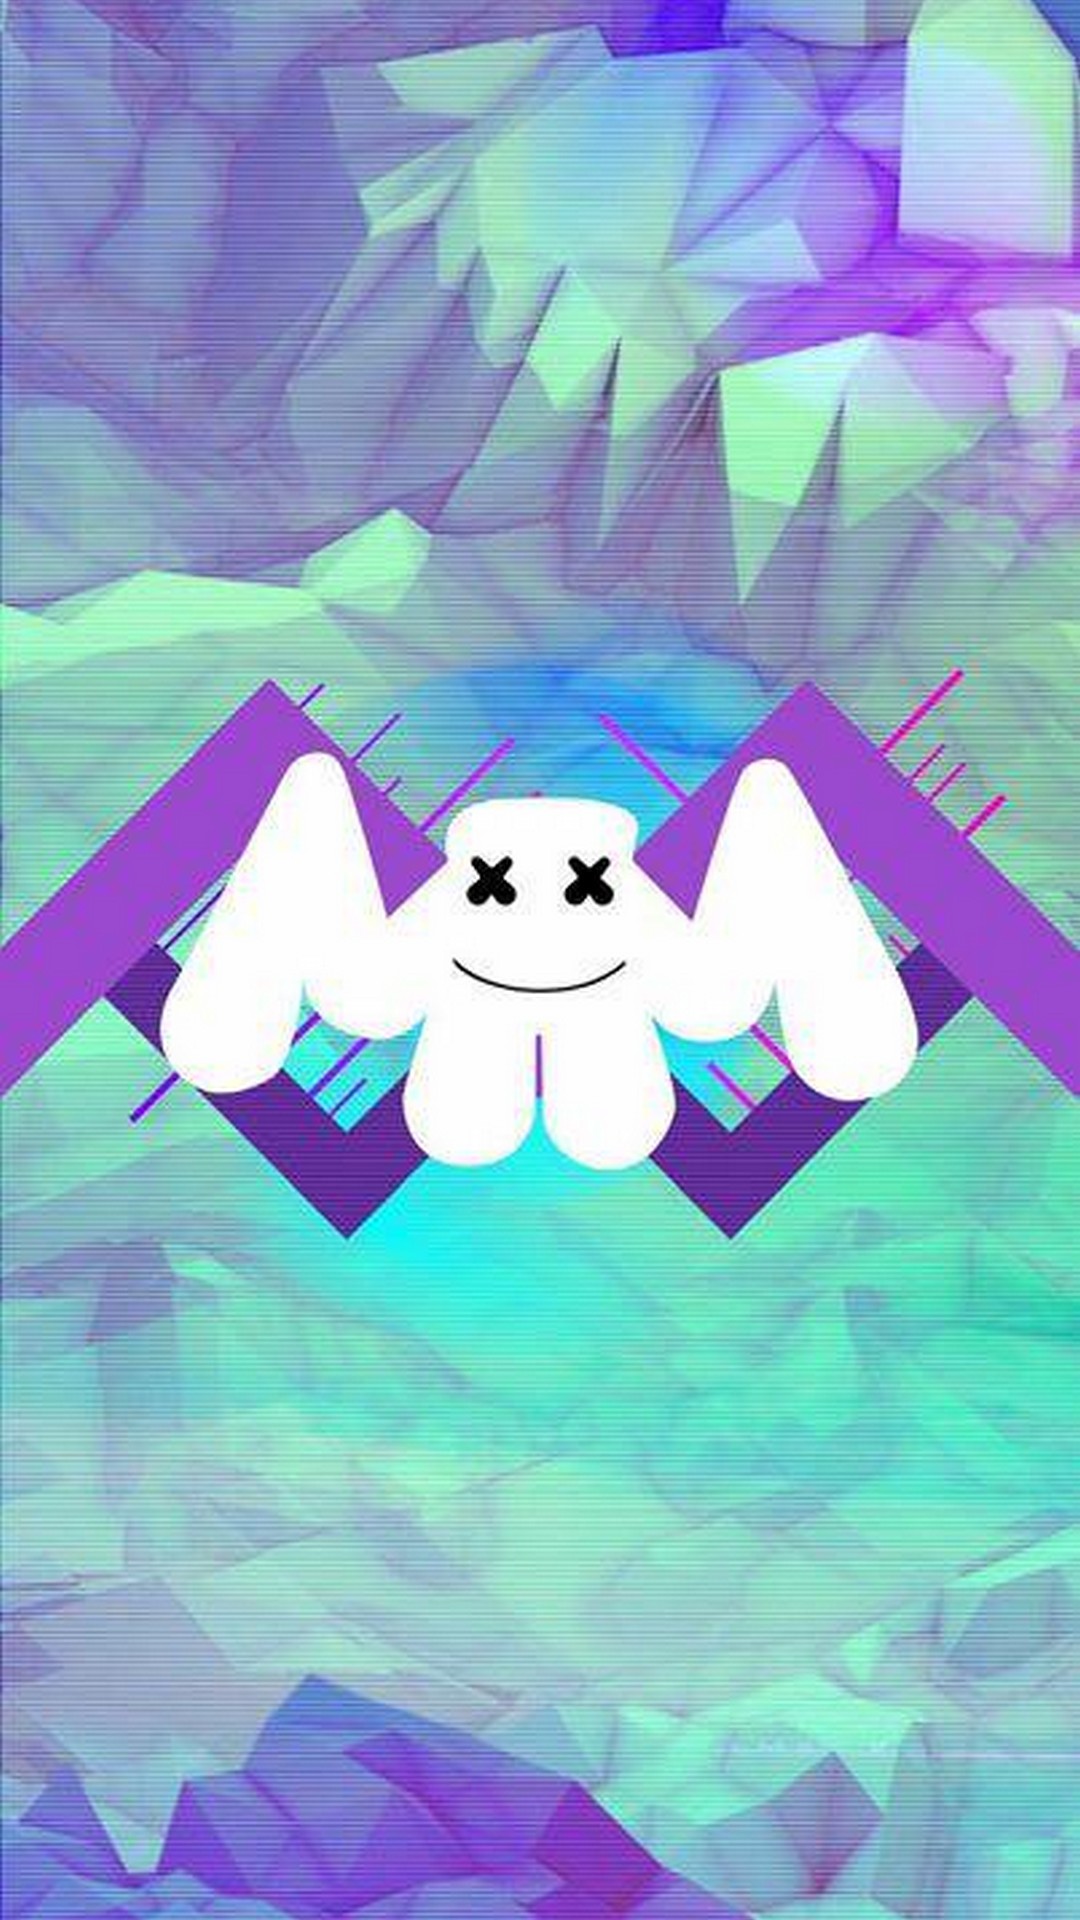 Marshmello iPhone Wallpaper with high-resolution 1080x1920 pixel. You can use this wallpaper for your iPhone 5, 6, 7, 8, X, XS, XR backgrounds, Mobile Screensaver, or iPad Lock Screen